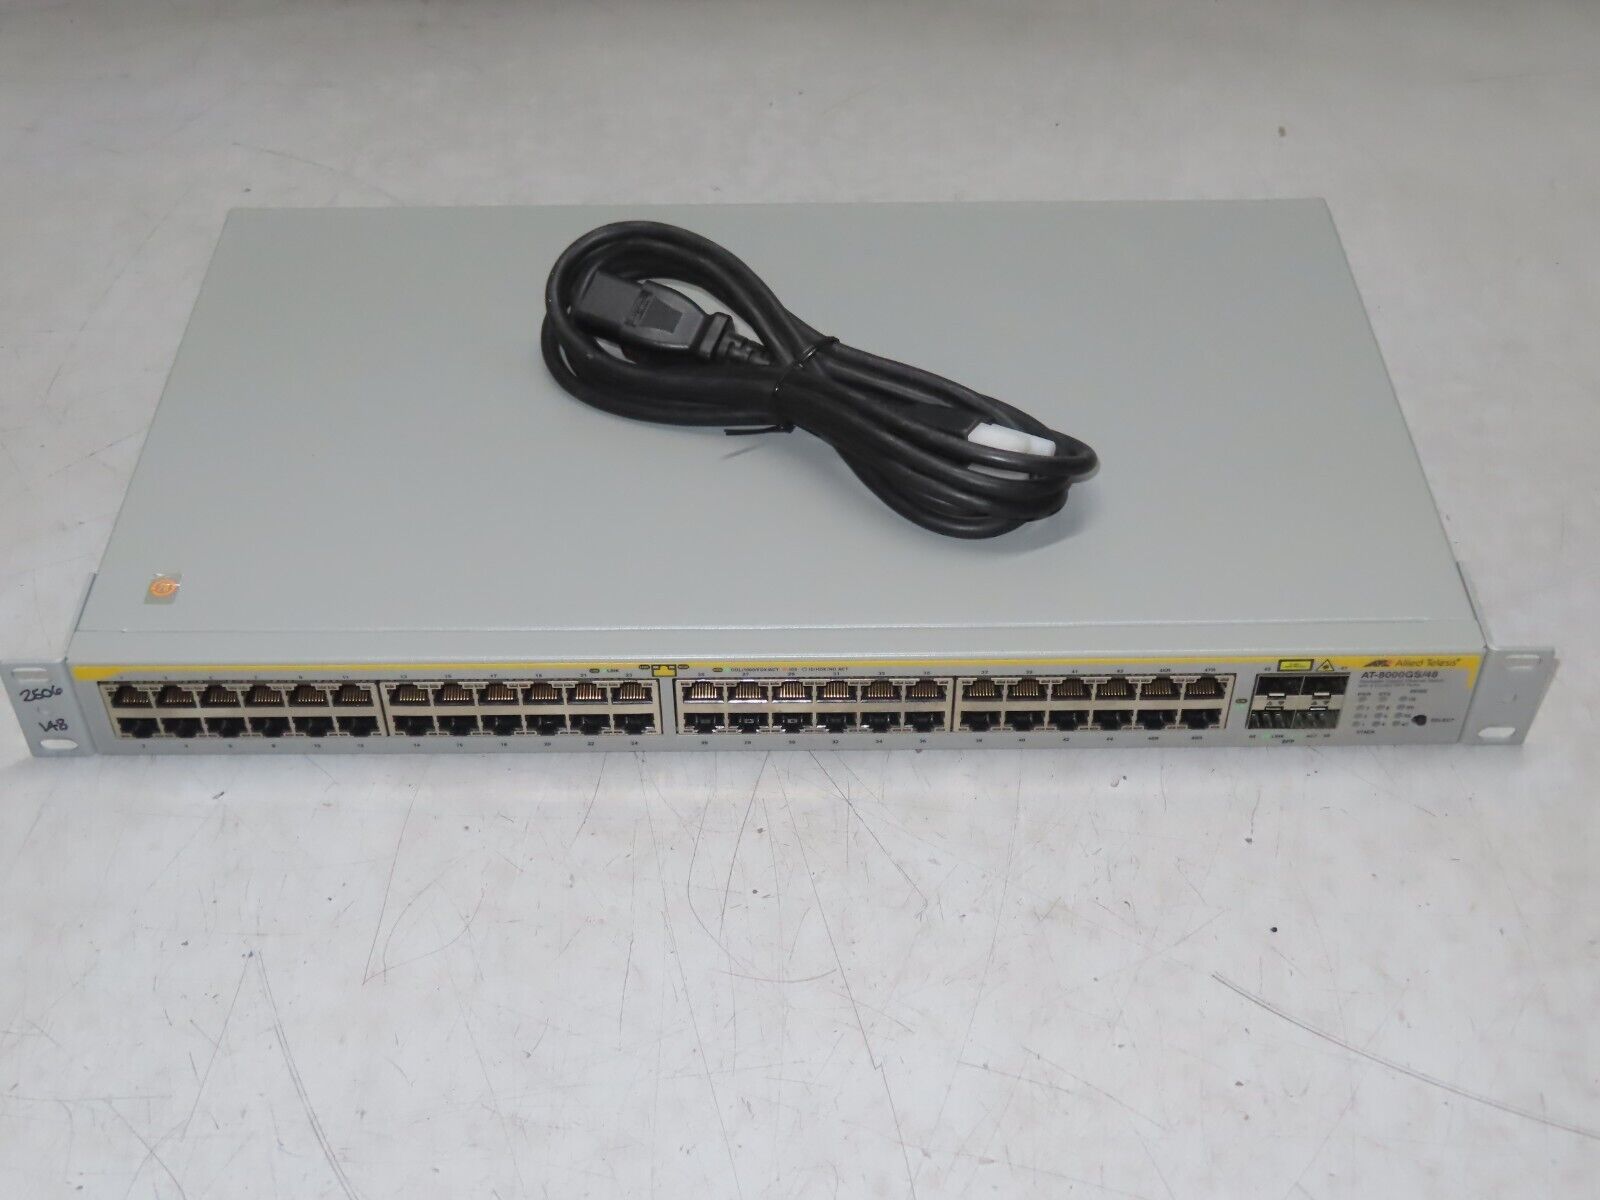 Allied Telesis 8000GS Series AT-8000GS/48 Switch